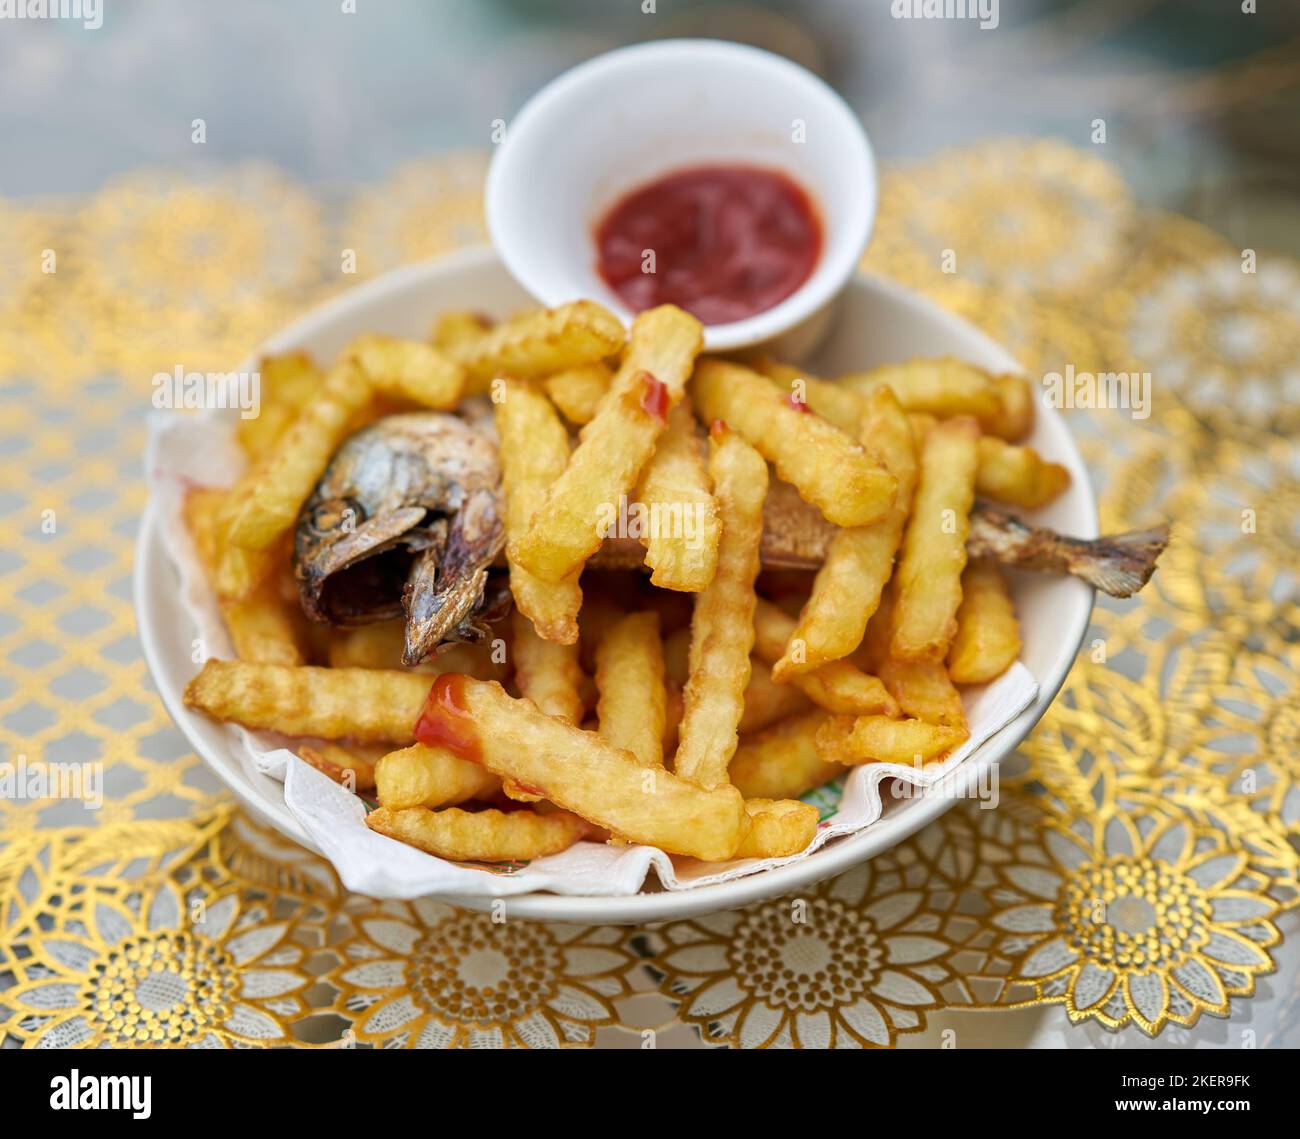 A plate of fish and chips with tomato ketchup. Stock Photo